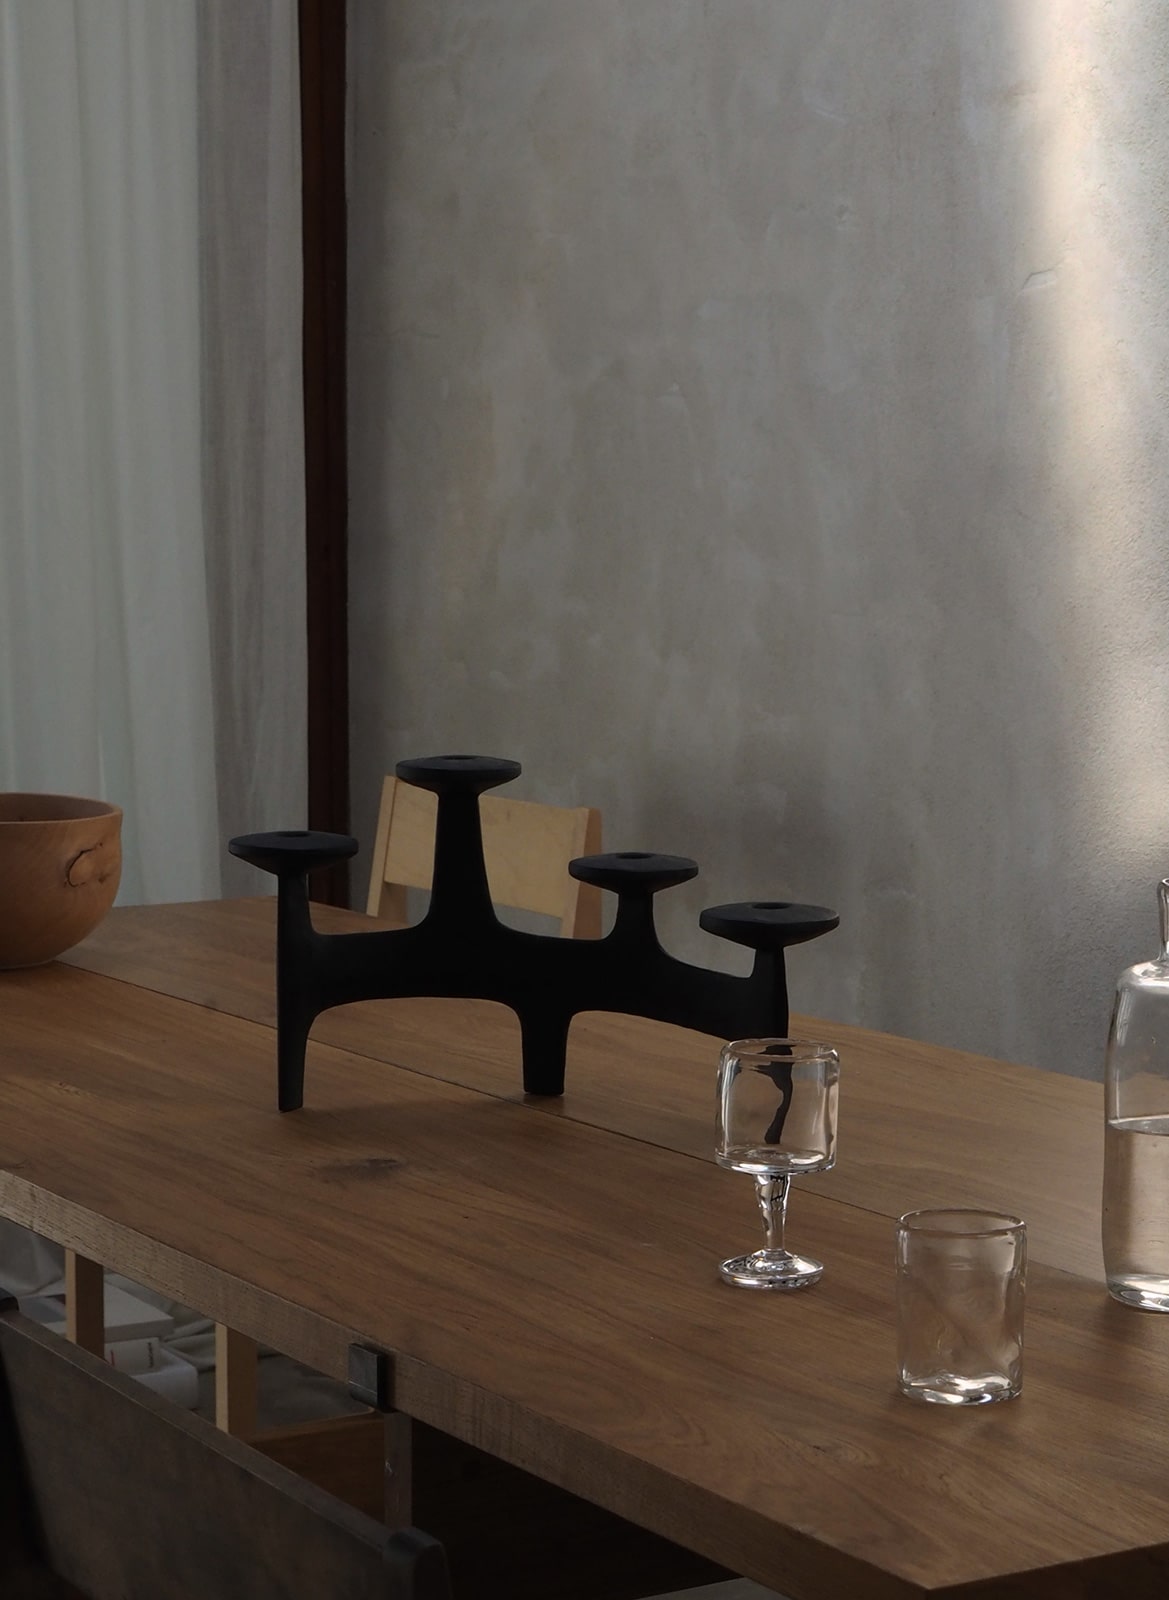 Black sculptural iron candelabra standing on table designed by Anderssen & Voll